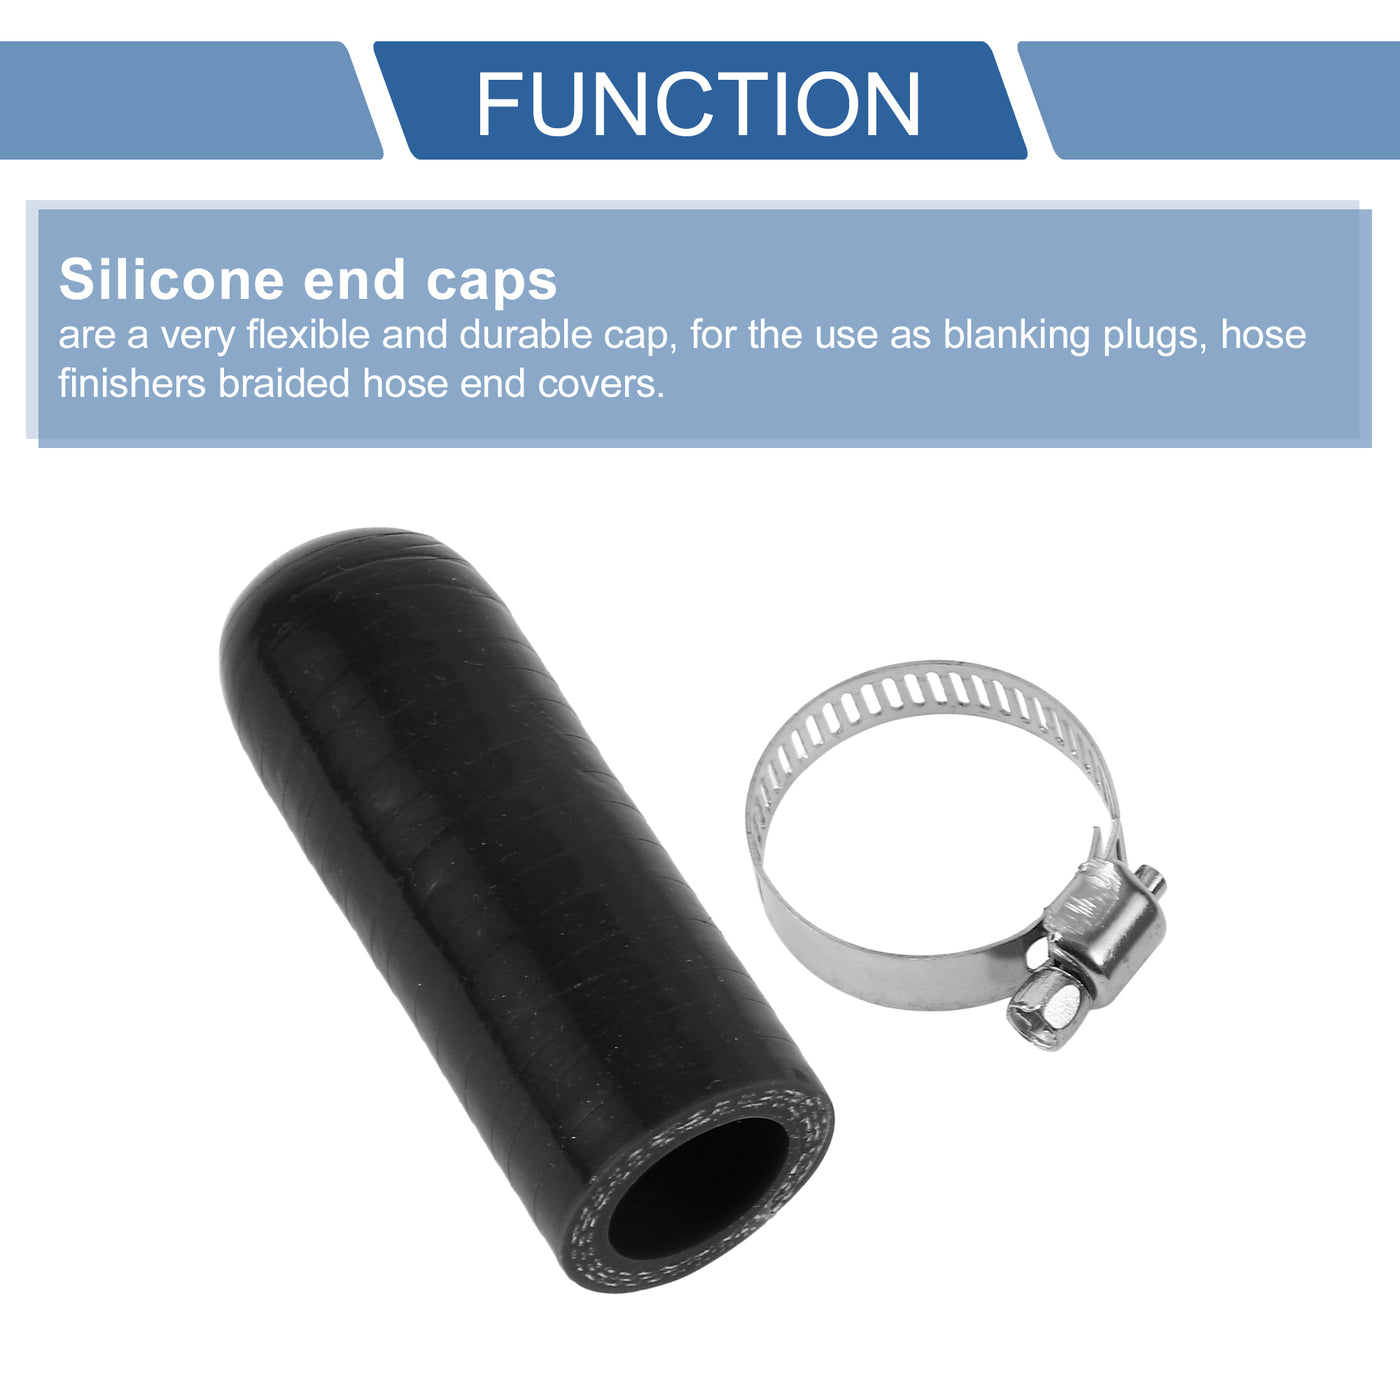 X AUTOHAUX 1 Pcs 60mm Length 18mm/0.71" ID Black Car Silicone Rubber Hose End Cap with Clamp Silicone Reinforced Blanking Cap for Bypass Tube Universal